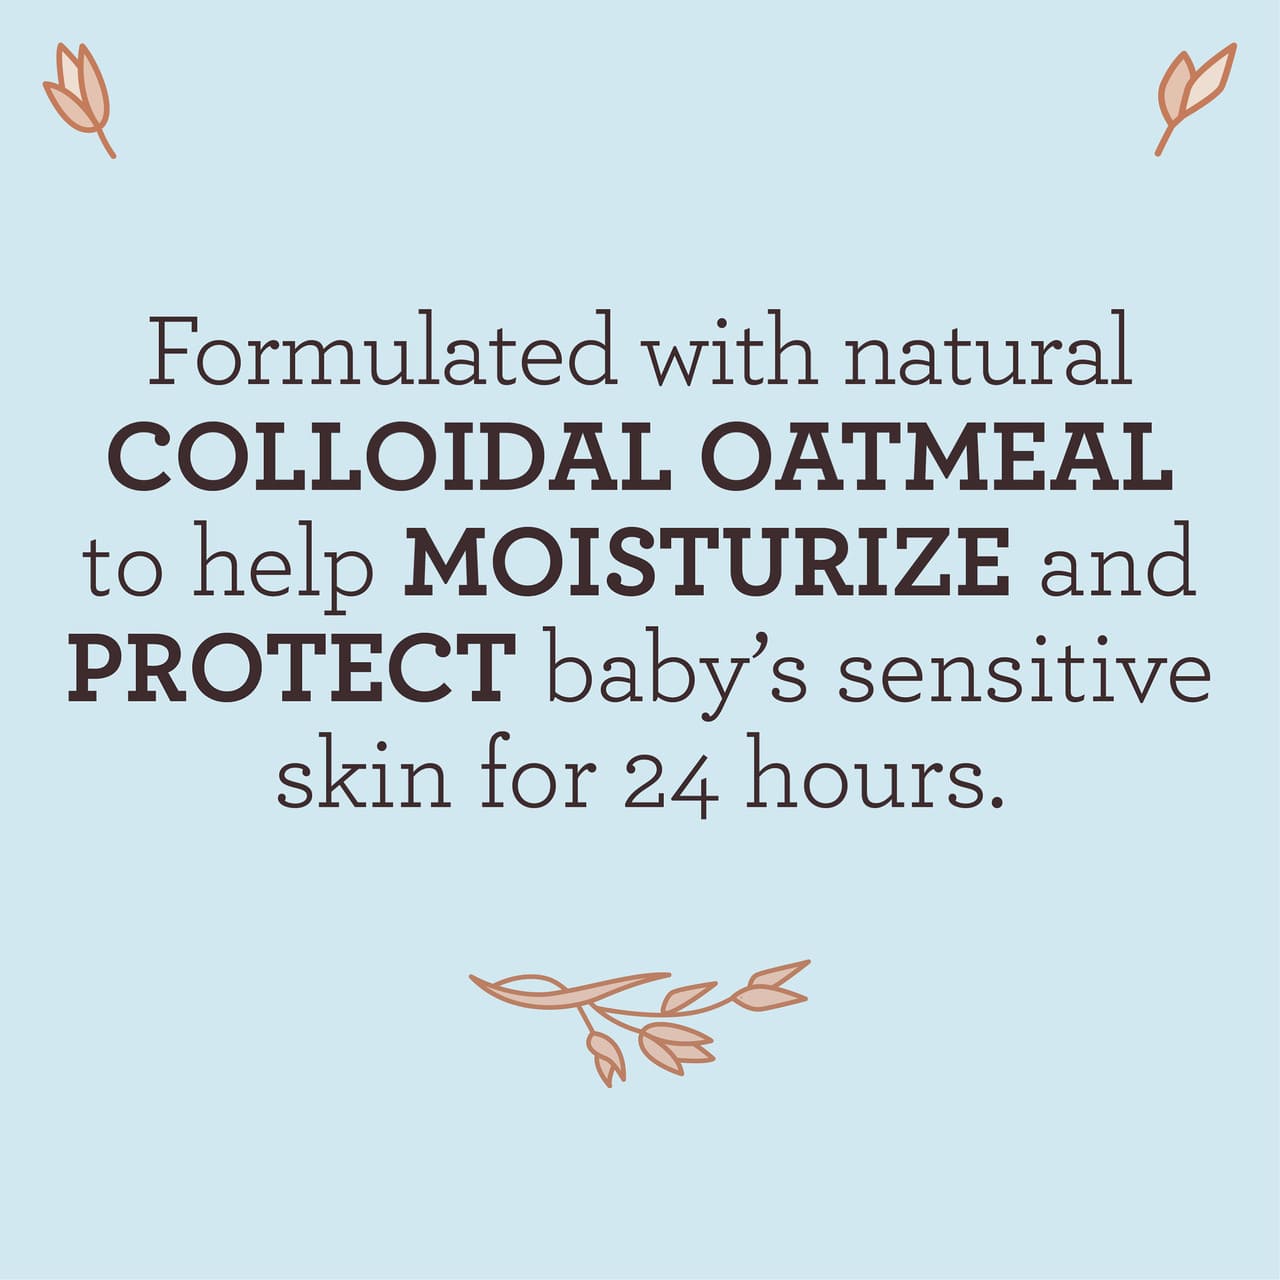 AVEENO® Lotion claim stating 'Formulated with natural Colloidal Oatmeal to help moisturize and protect baby’s sensitive skin for 24 hours'